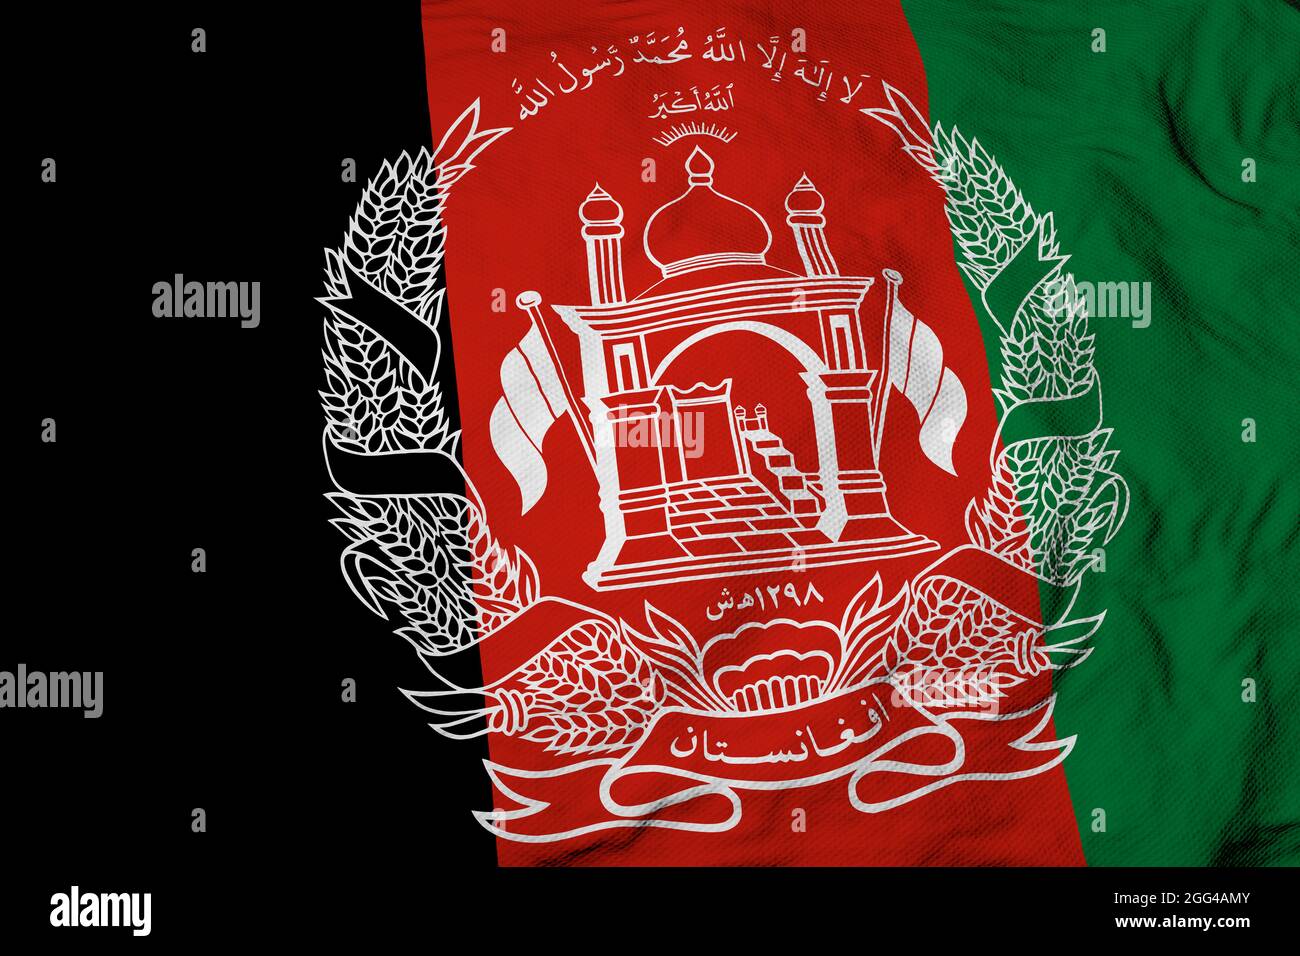 Full frame close-up on a waving Afghani flag. Stock Photo